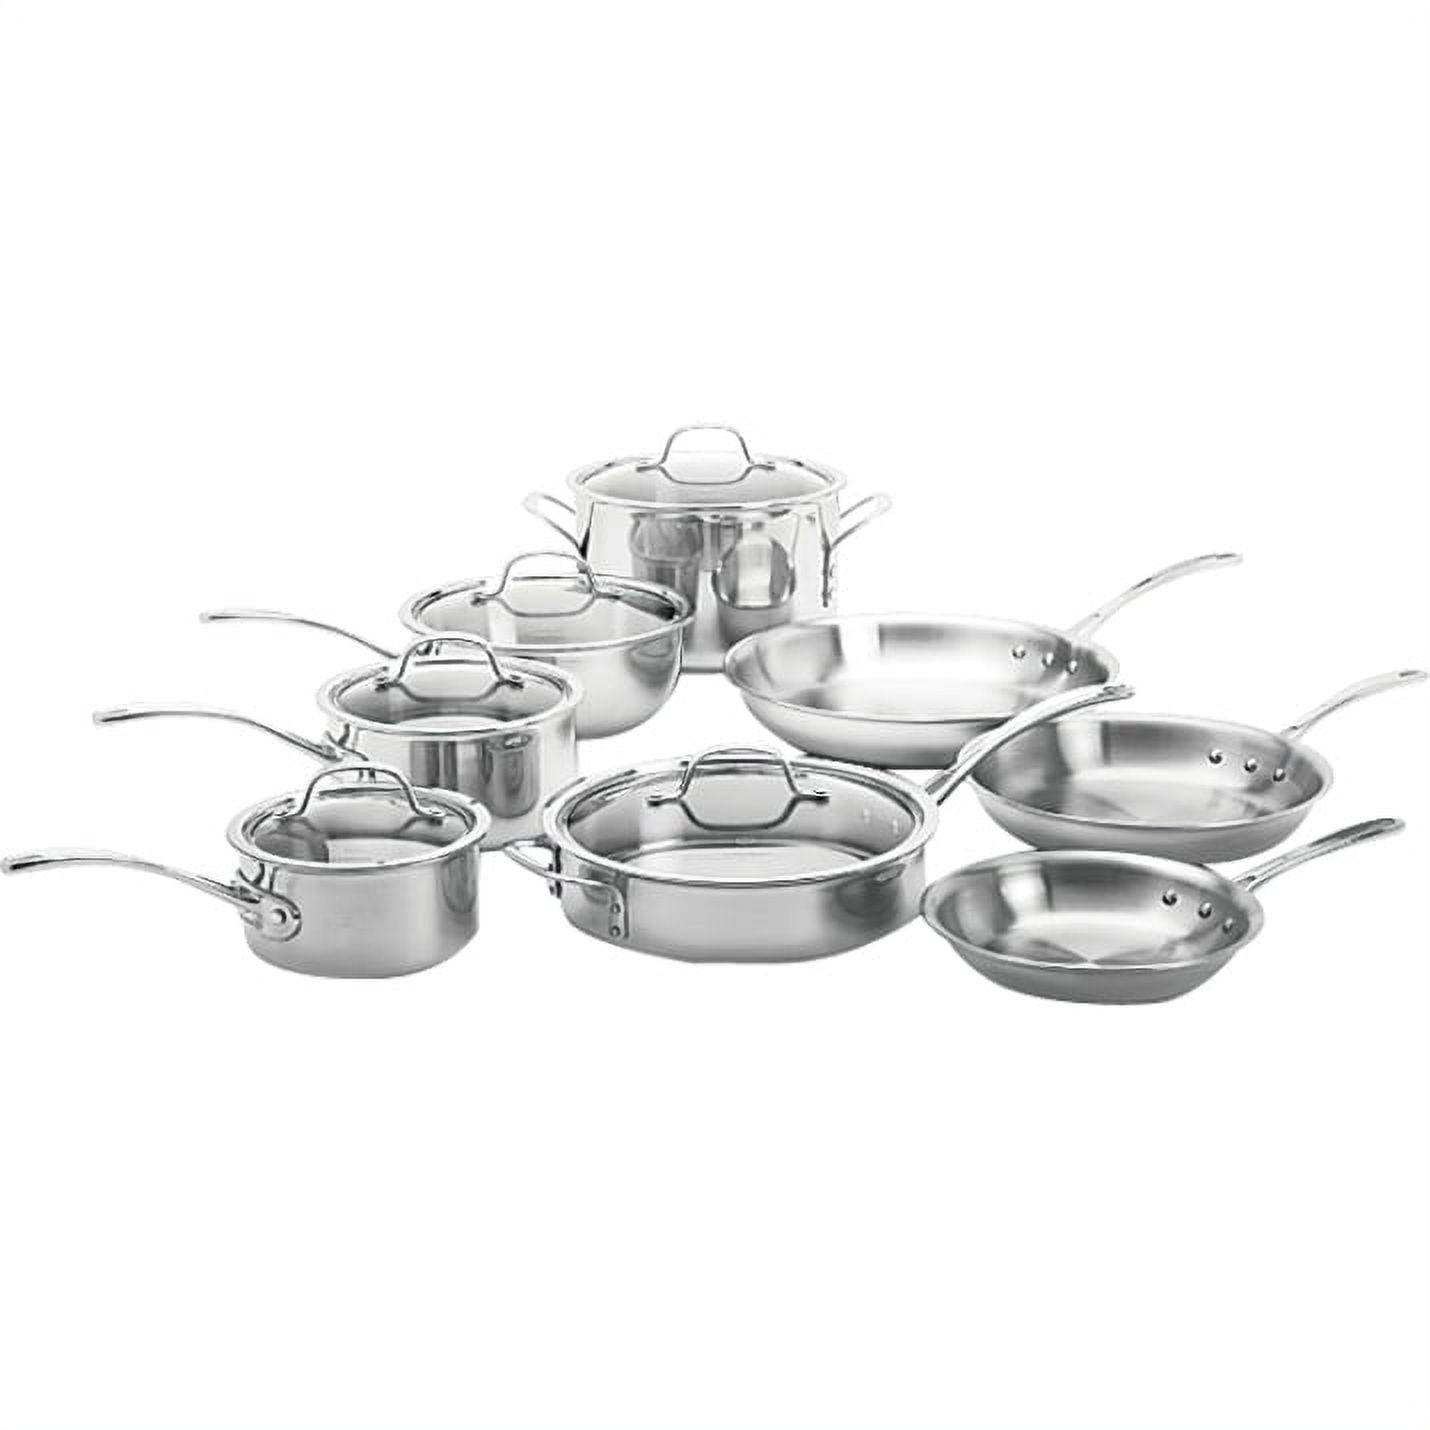 Calphalon Tri-Ply Stainless Steel 8 Piece Cookware Set - Macy's